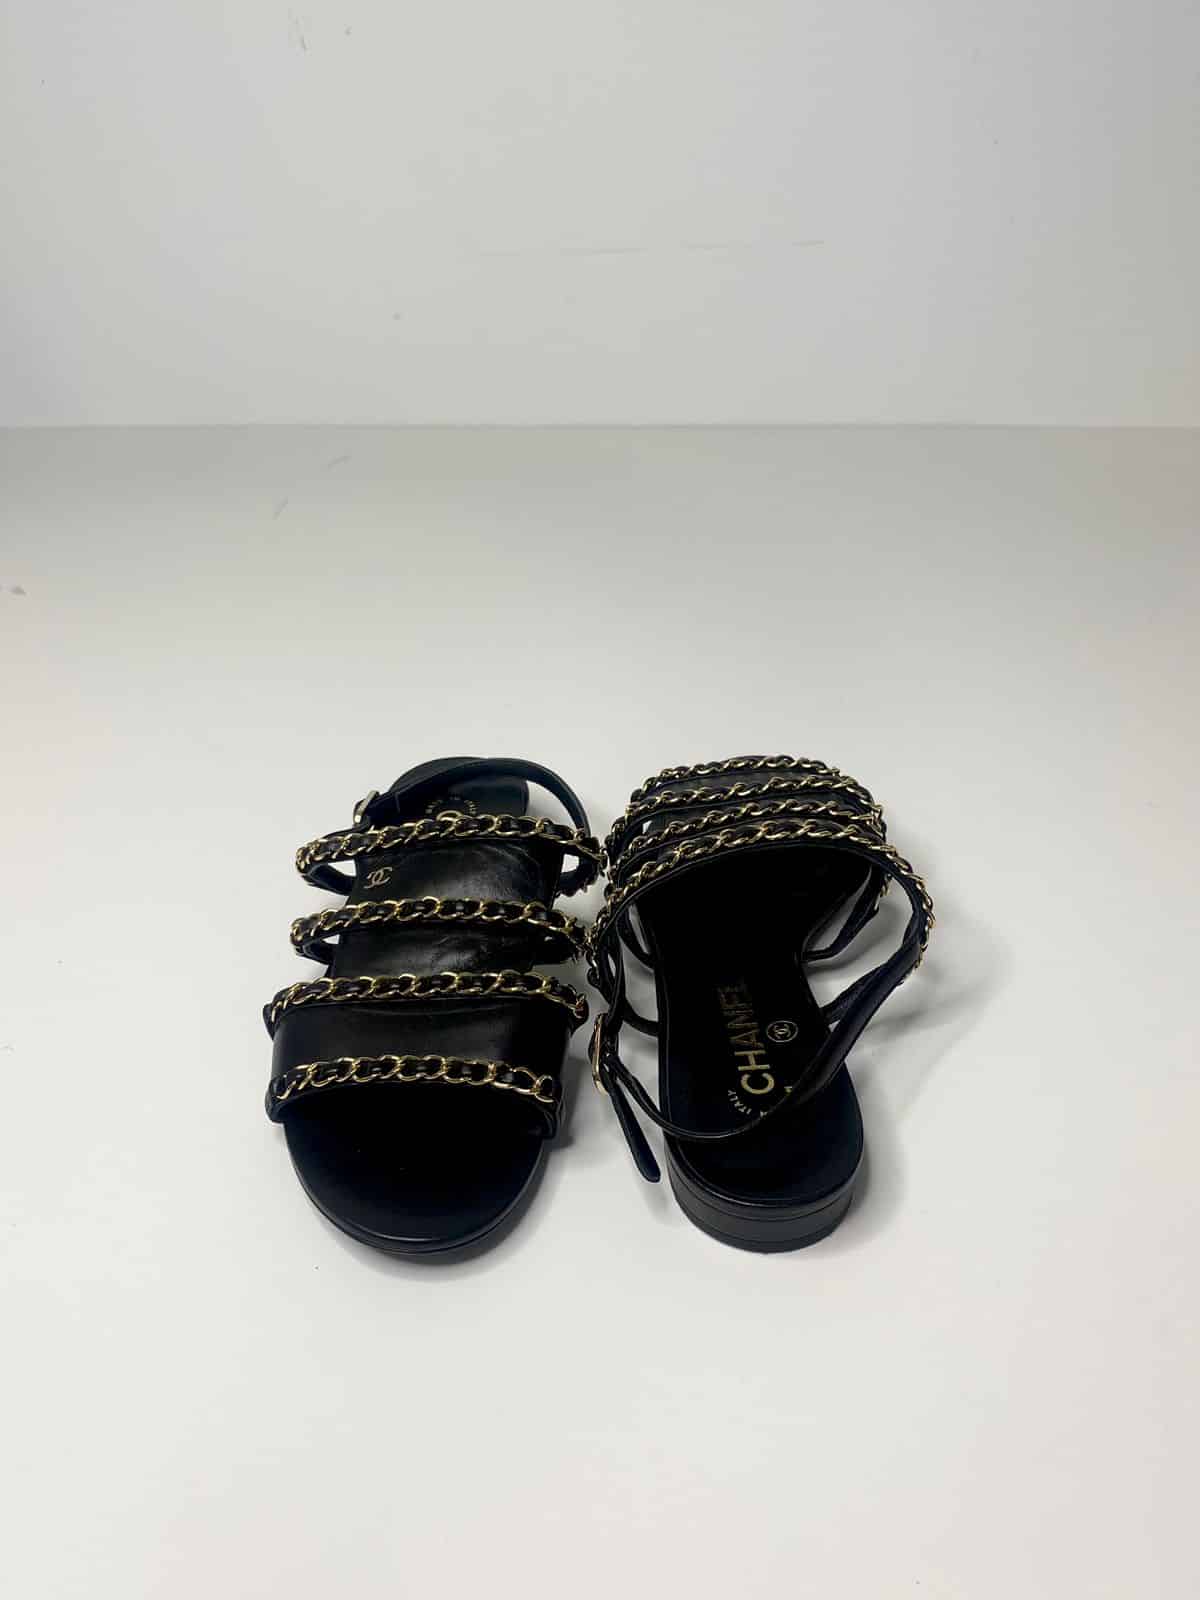 Chanel Black Leather Chain Slingback Sandals Size 37EU - The Luxury Flavor